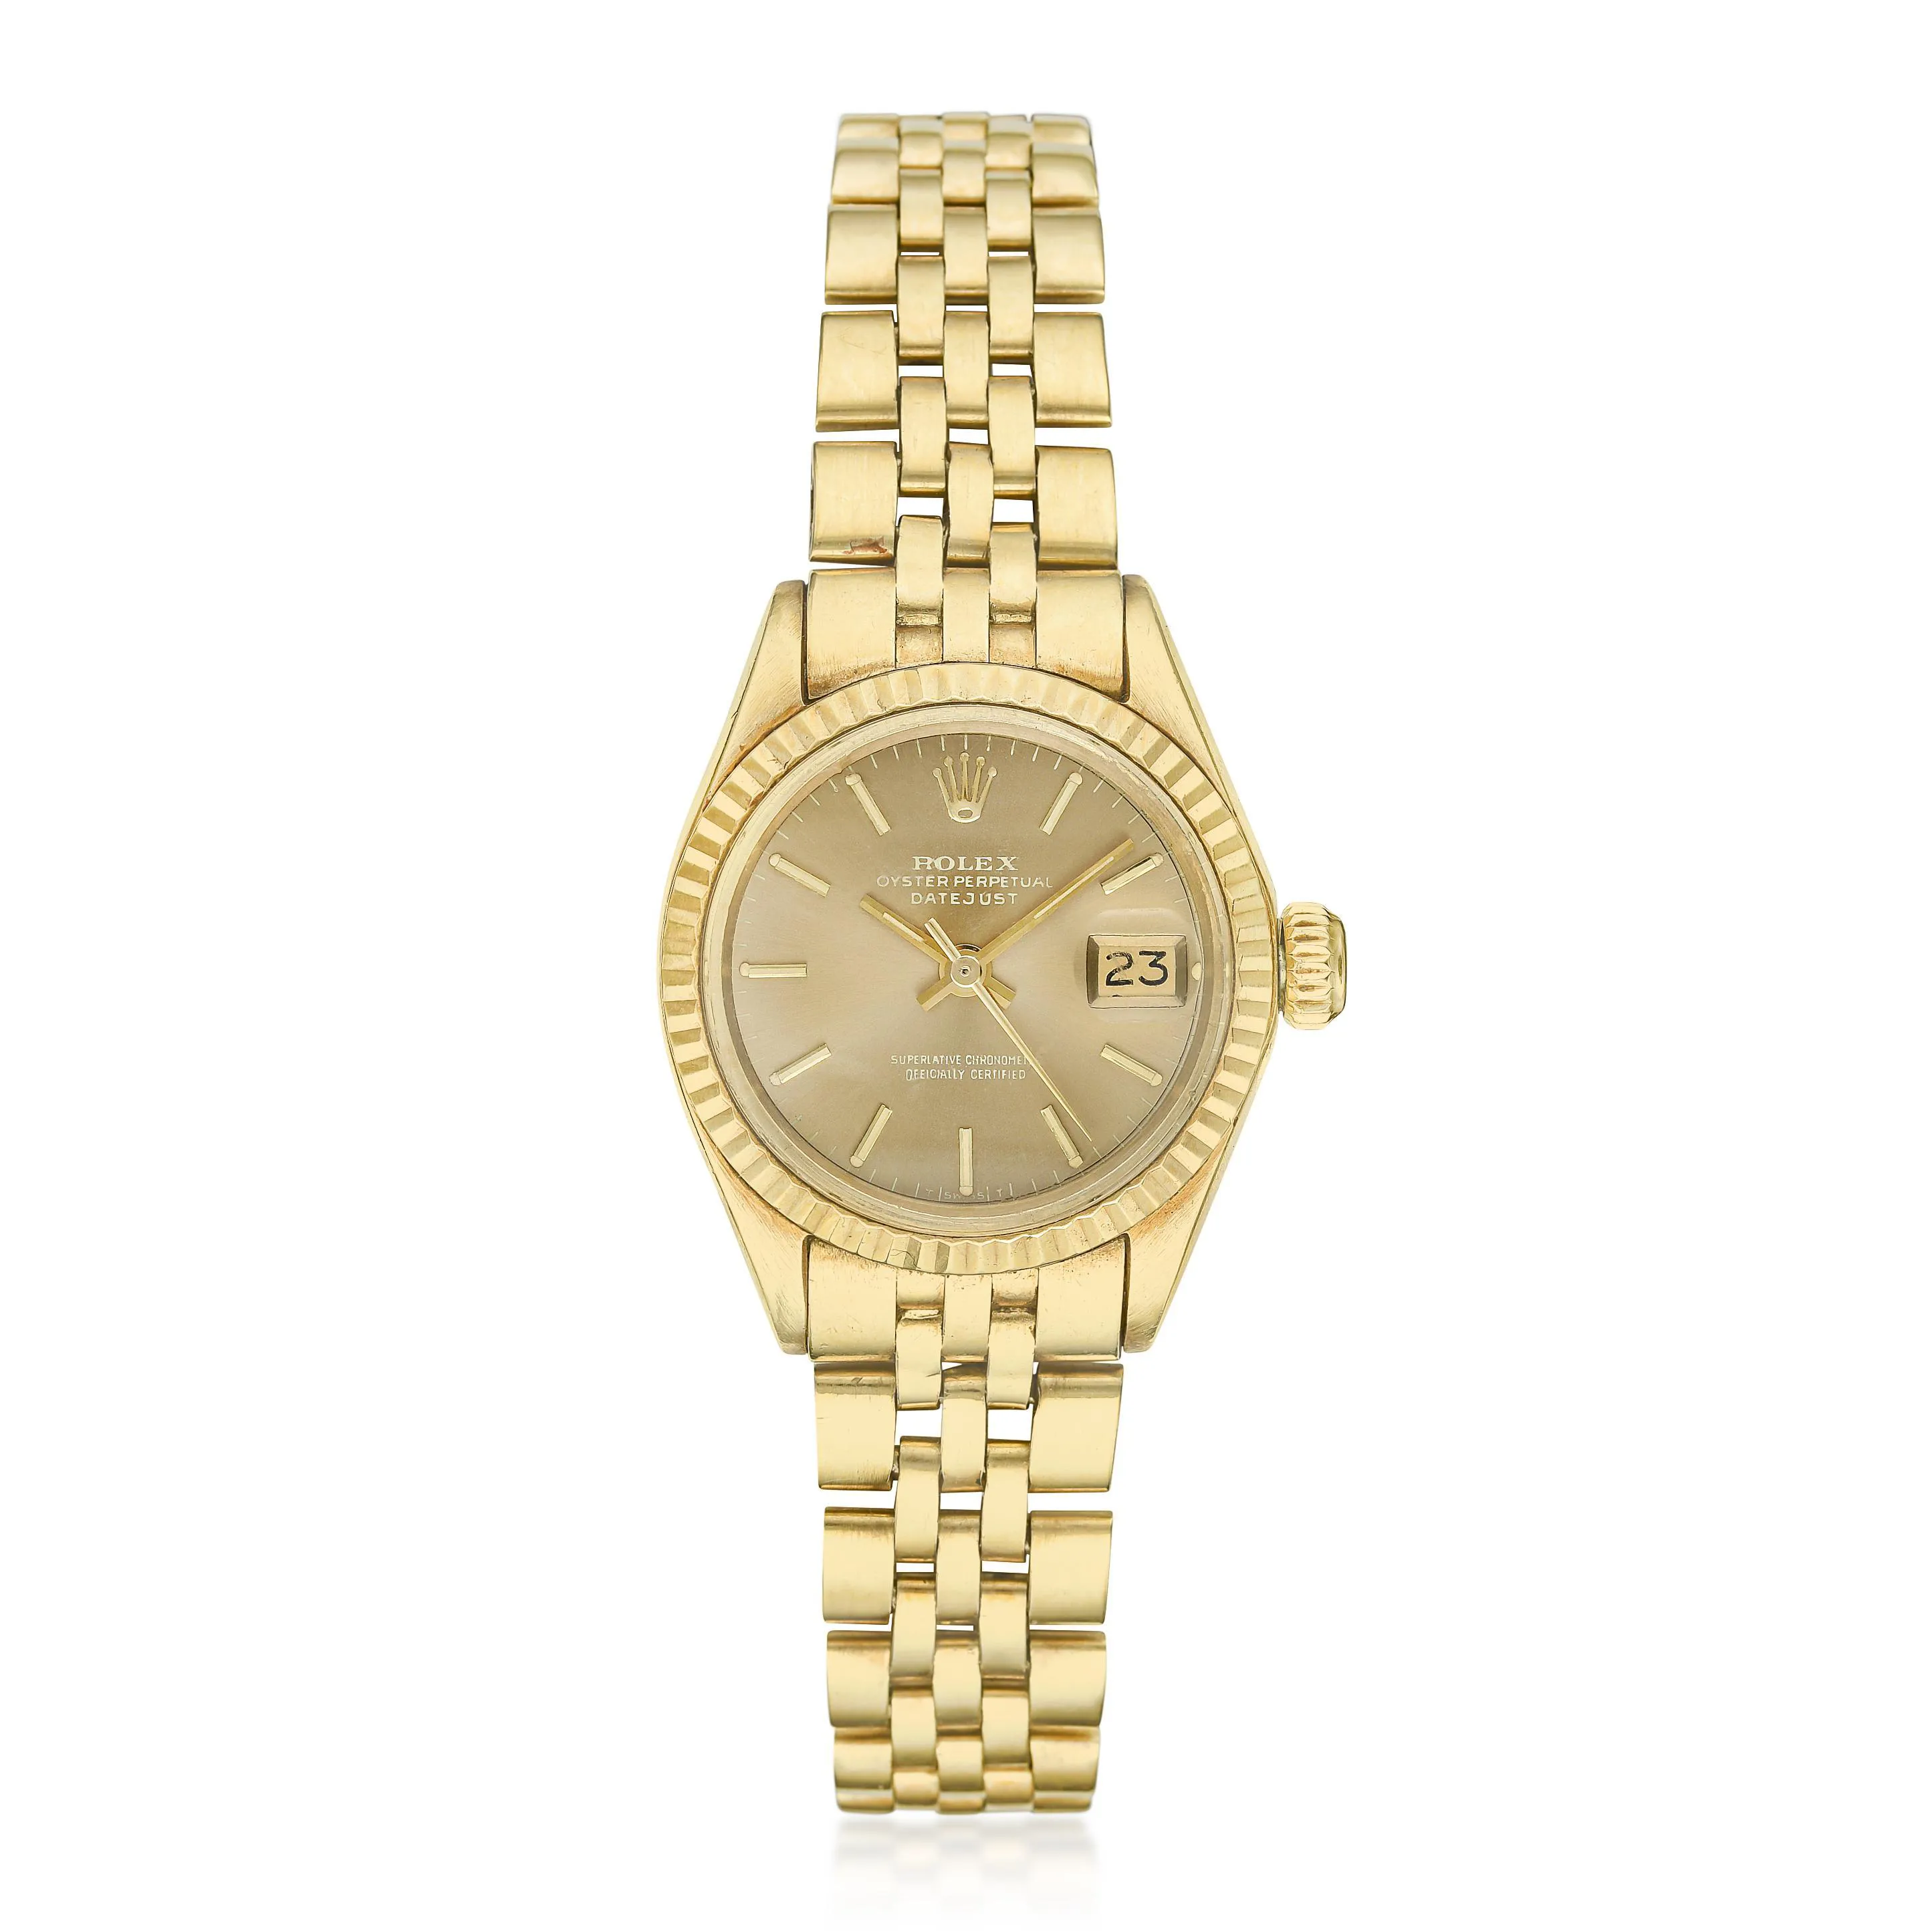 Rolex Datejust 6917 26mm 18k yellow gold Cappuccino